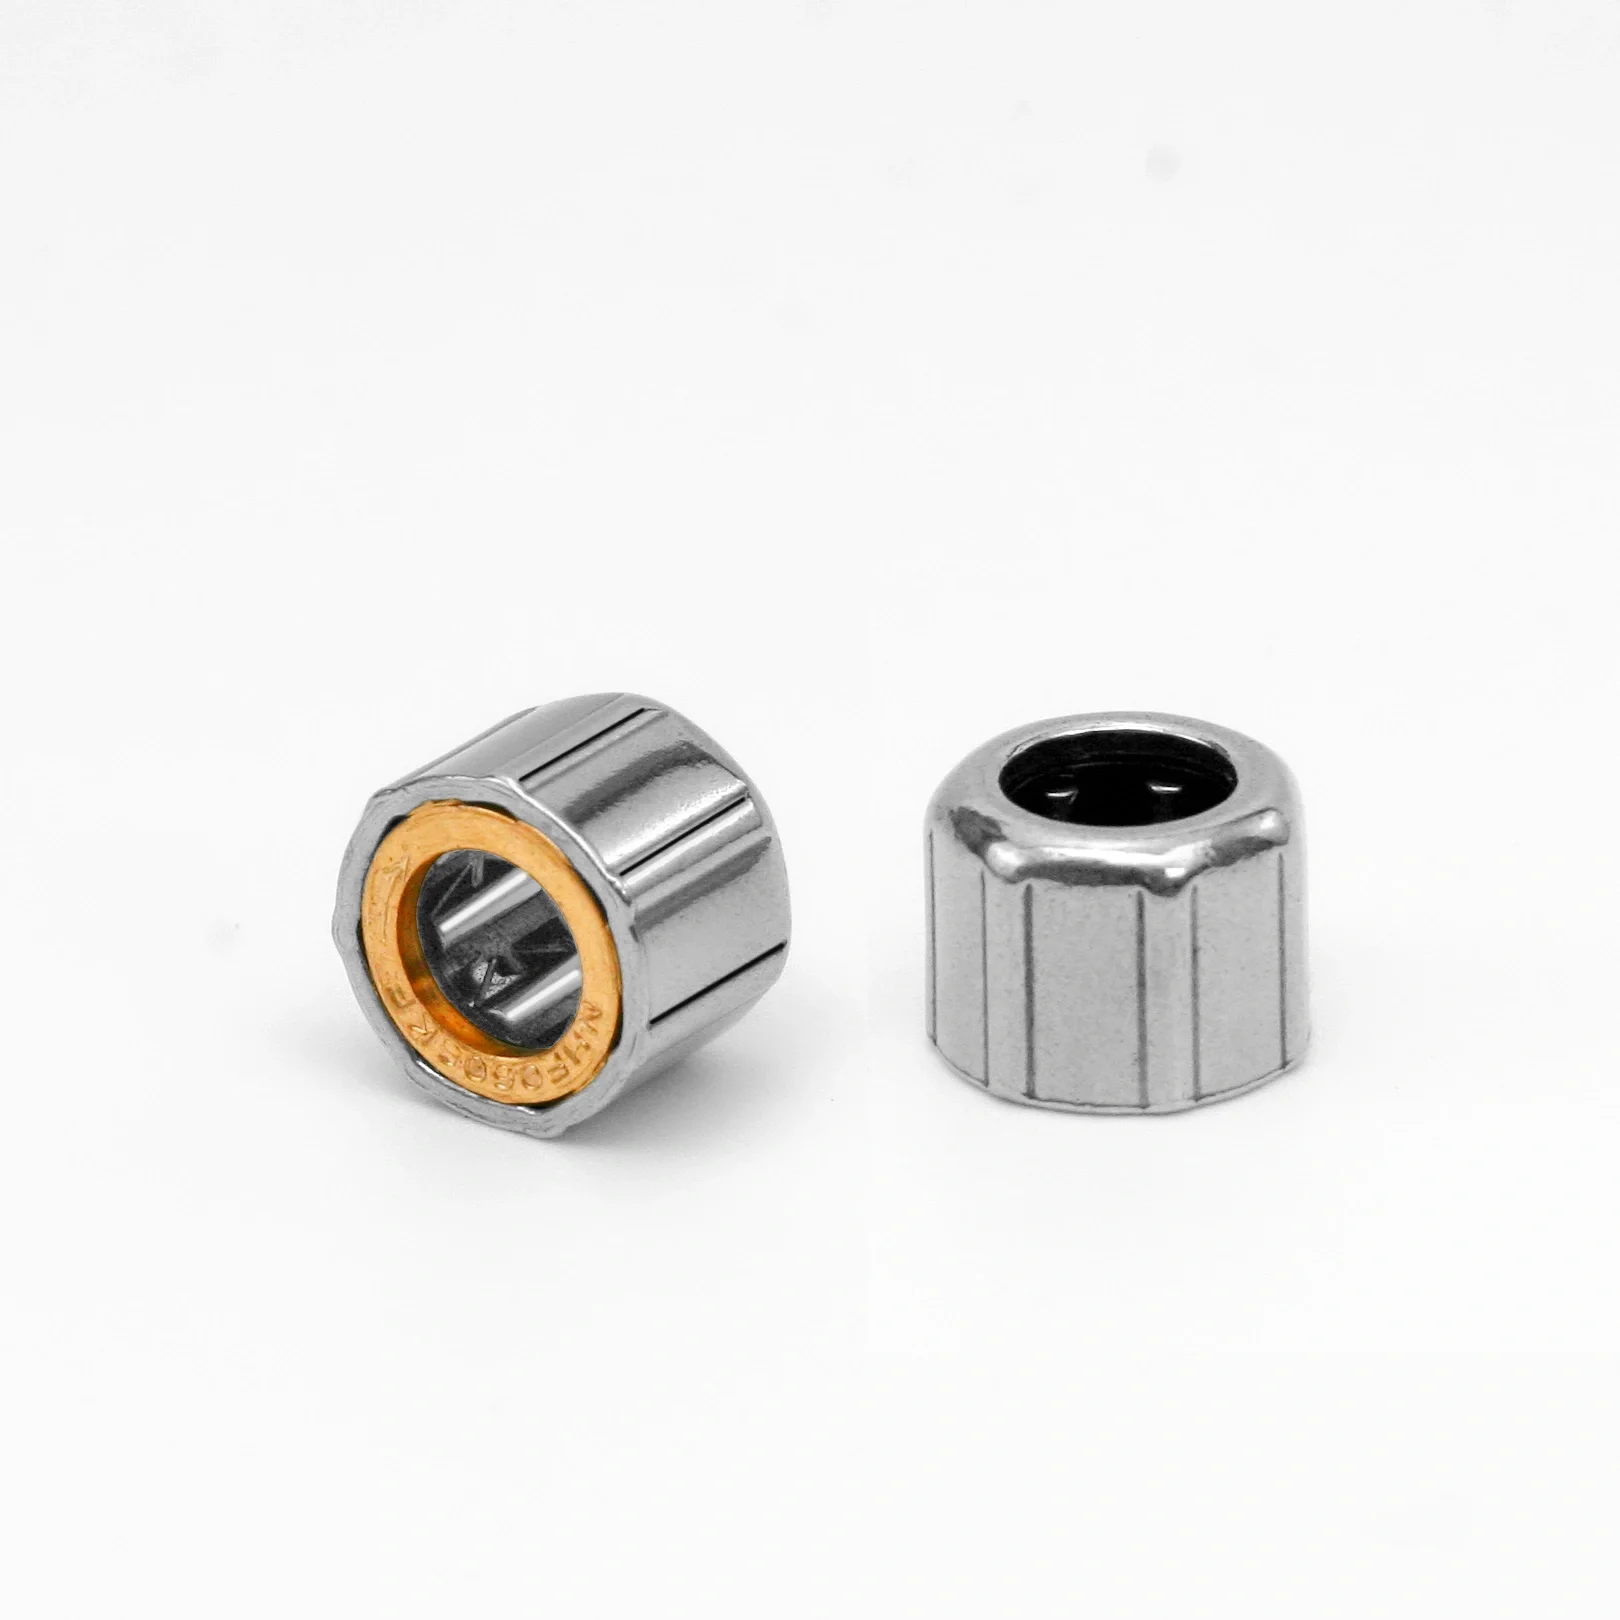 Drawn Cup Needle Roller Clutch and Bearing Assemblies-NHF